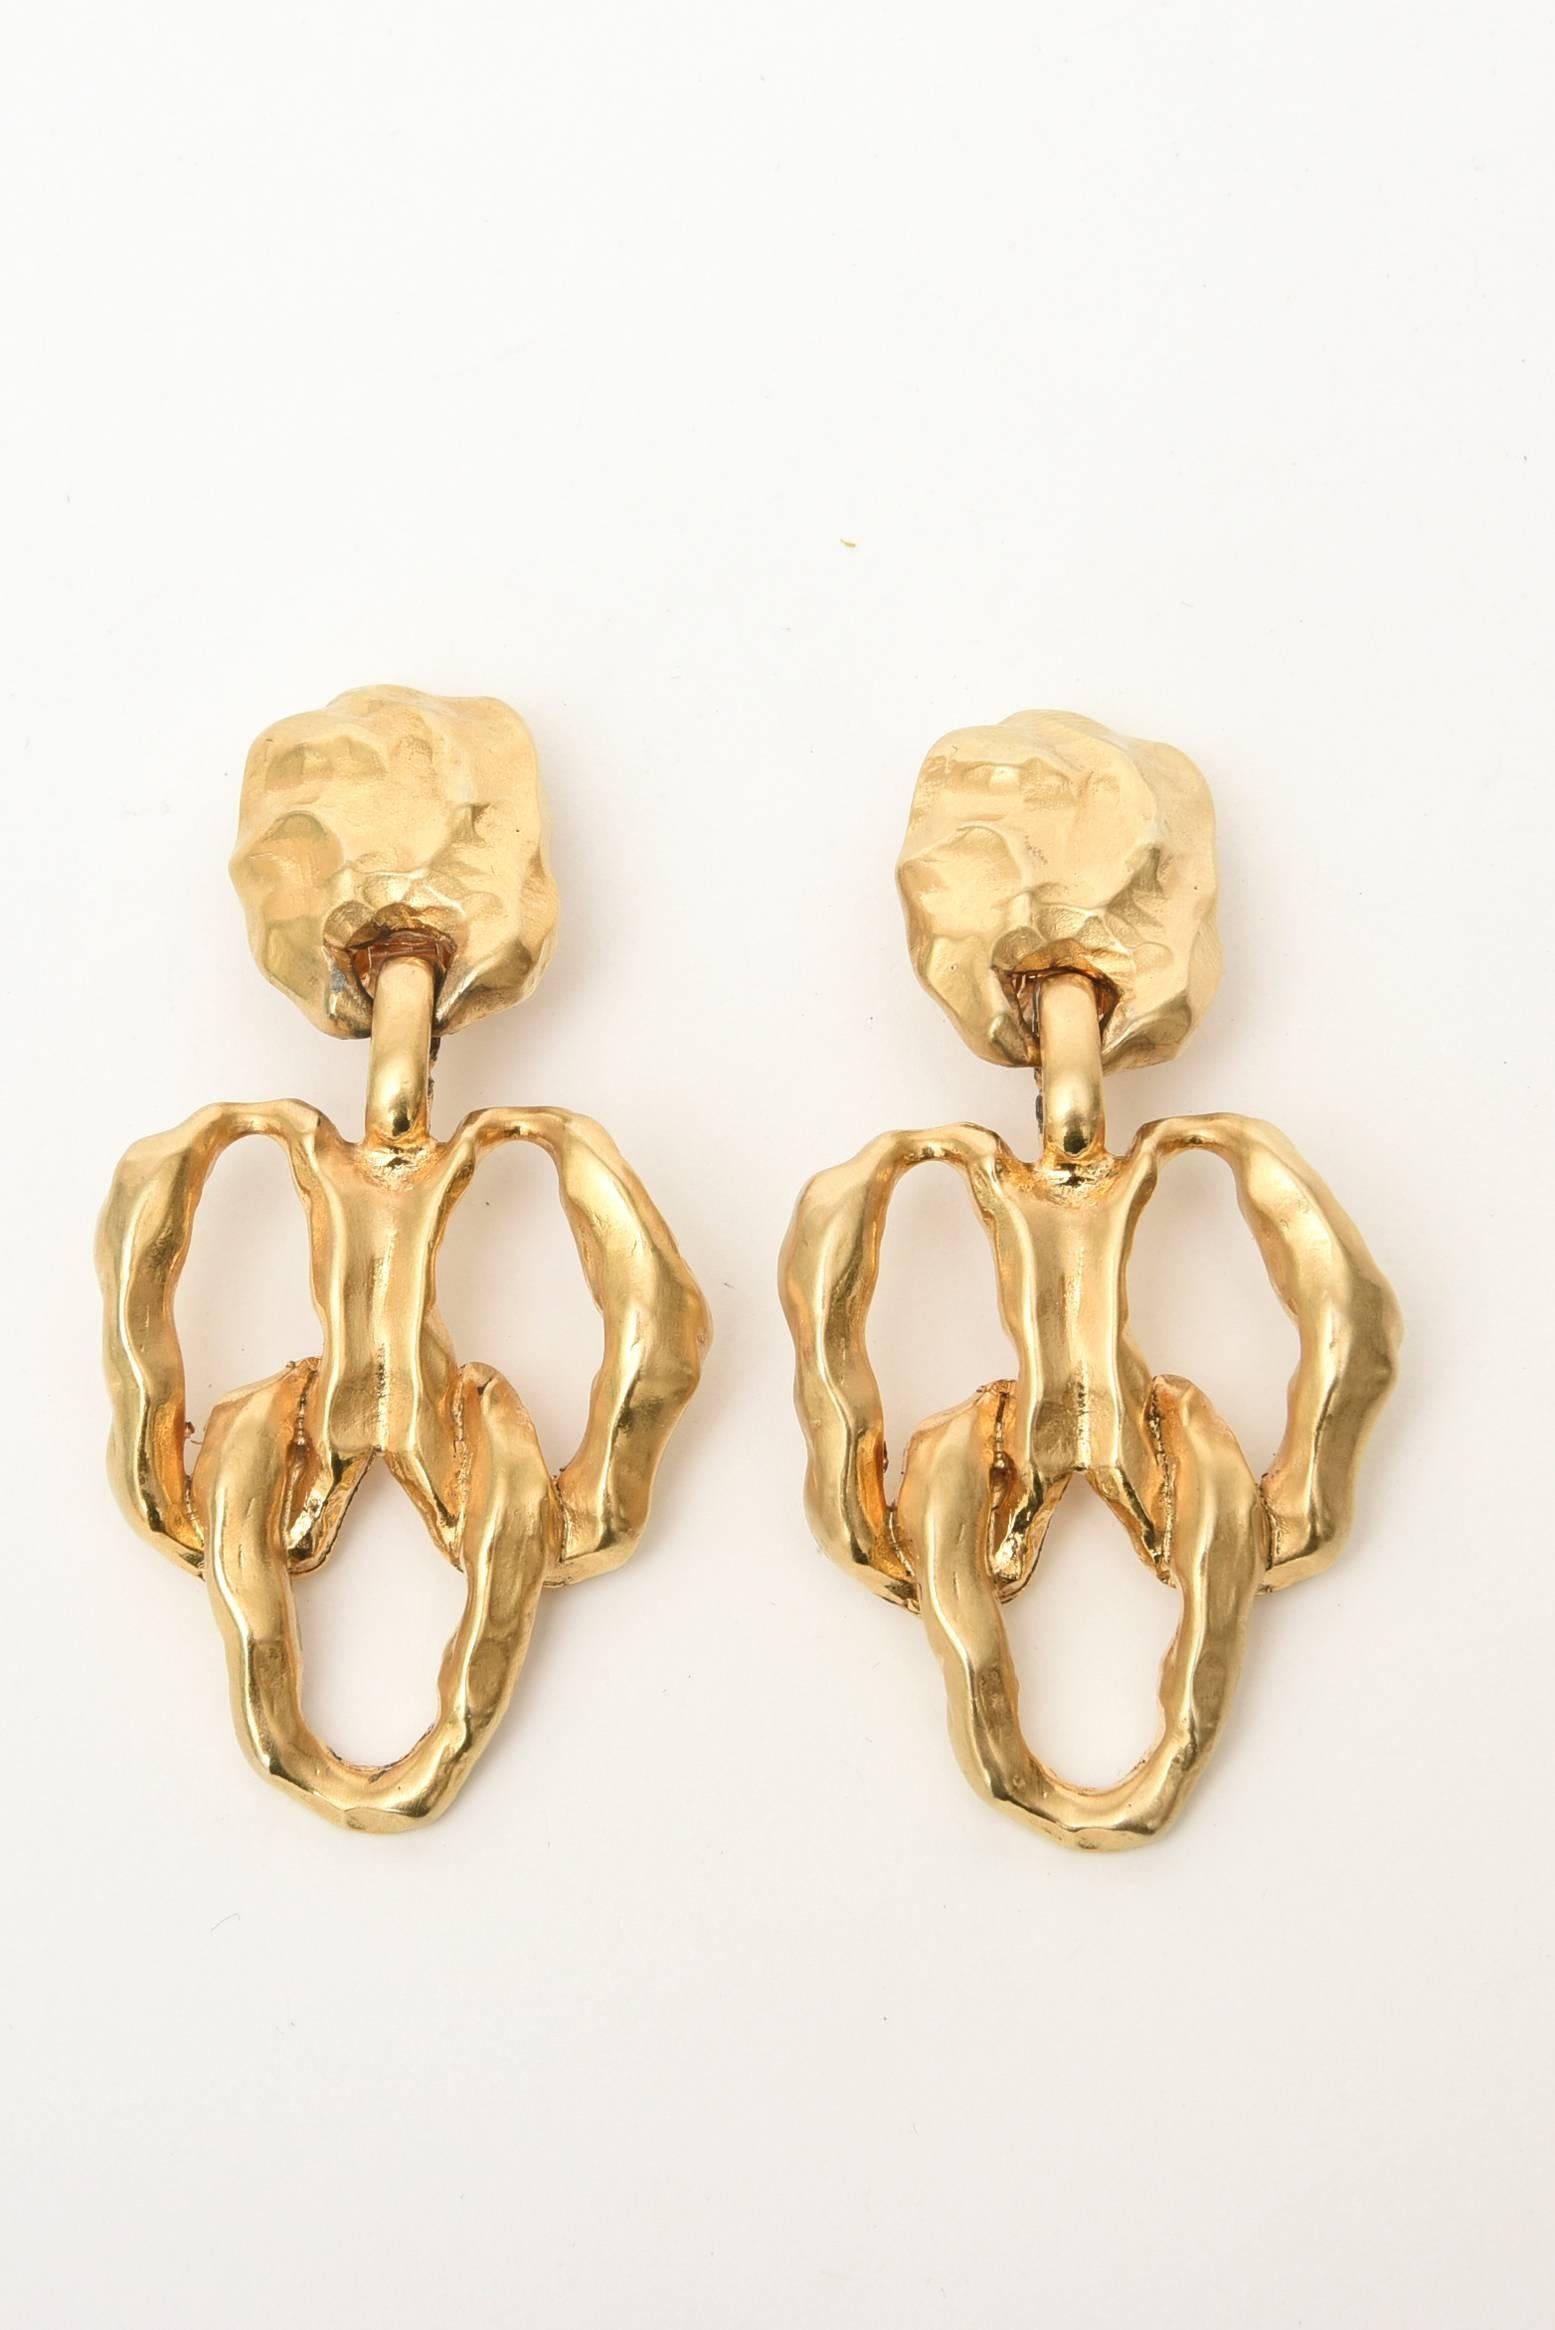 These handsome gold-plated dangle earrings make a statement. They are very au courant now. They are for the 80's.
They are clip on's and have some texture to them.
